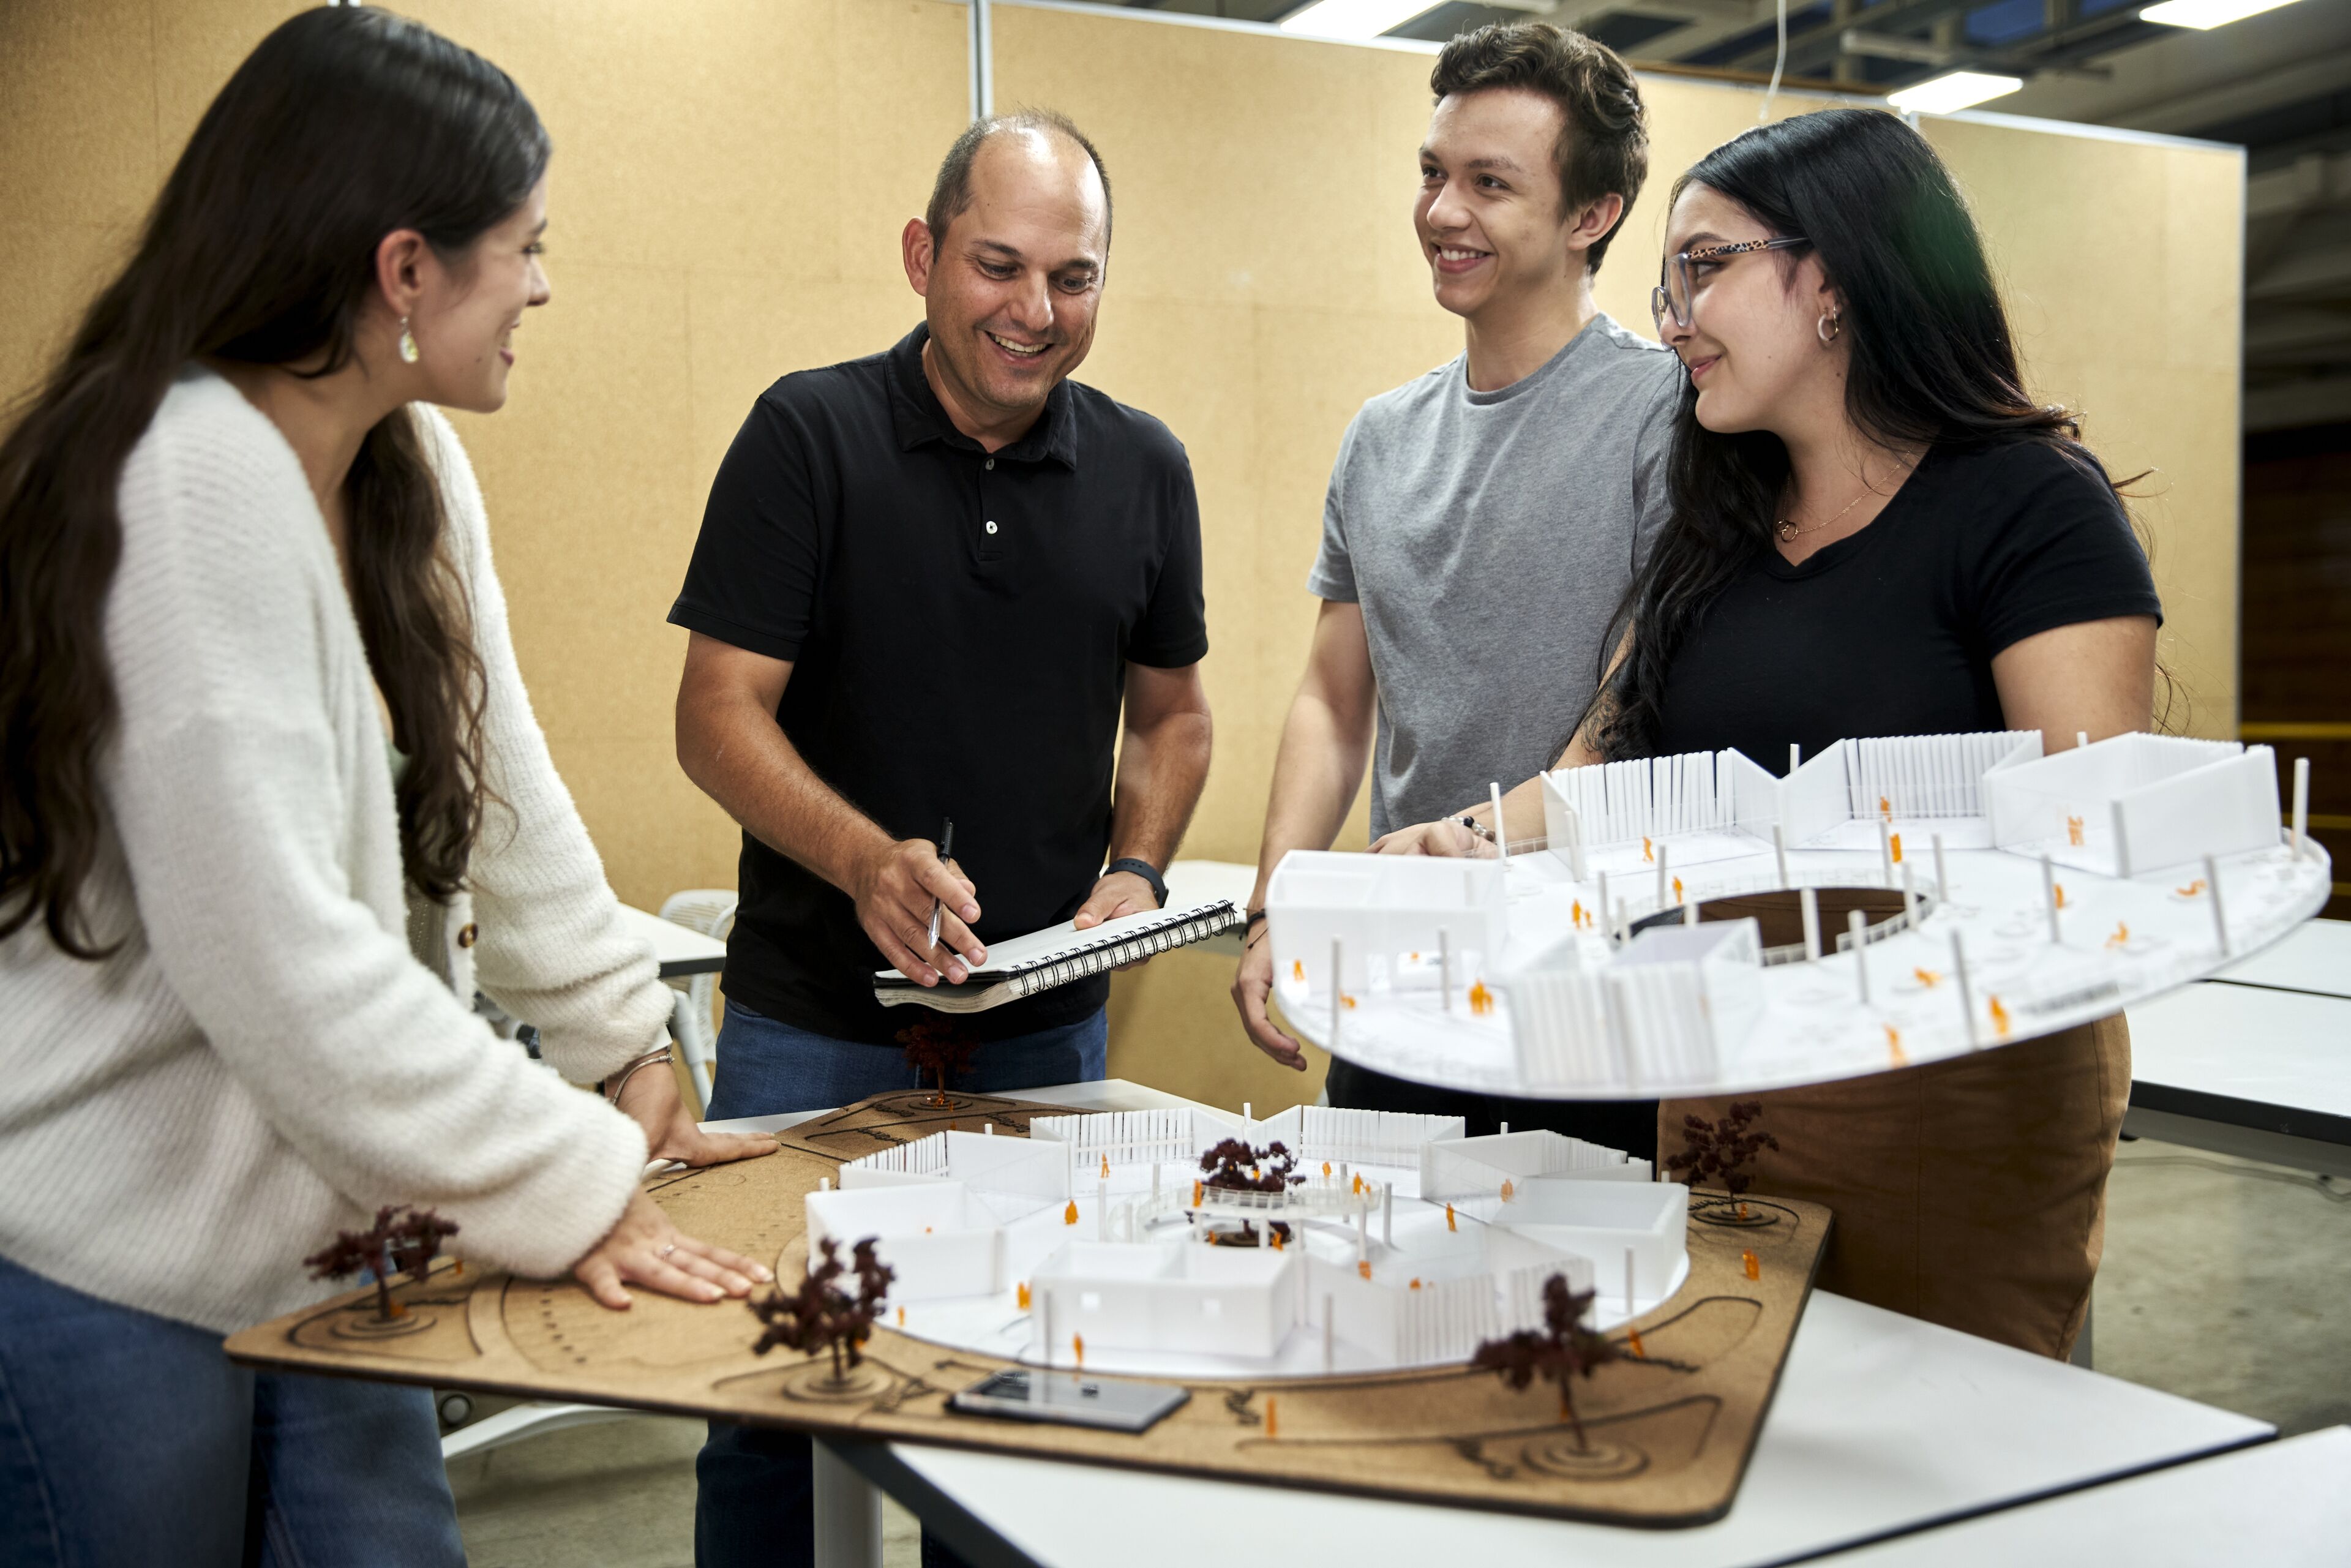 Four professionals gather around a detailed architectural model, discussing its design.